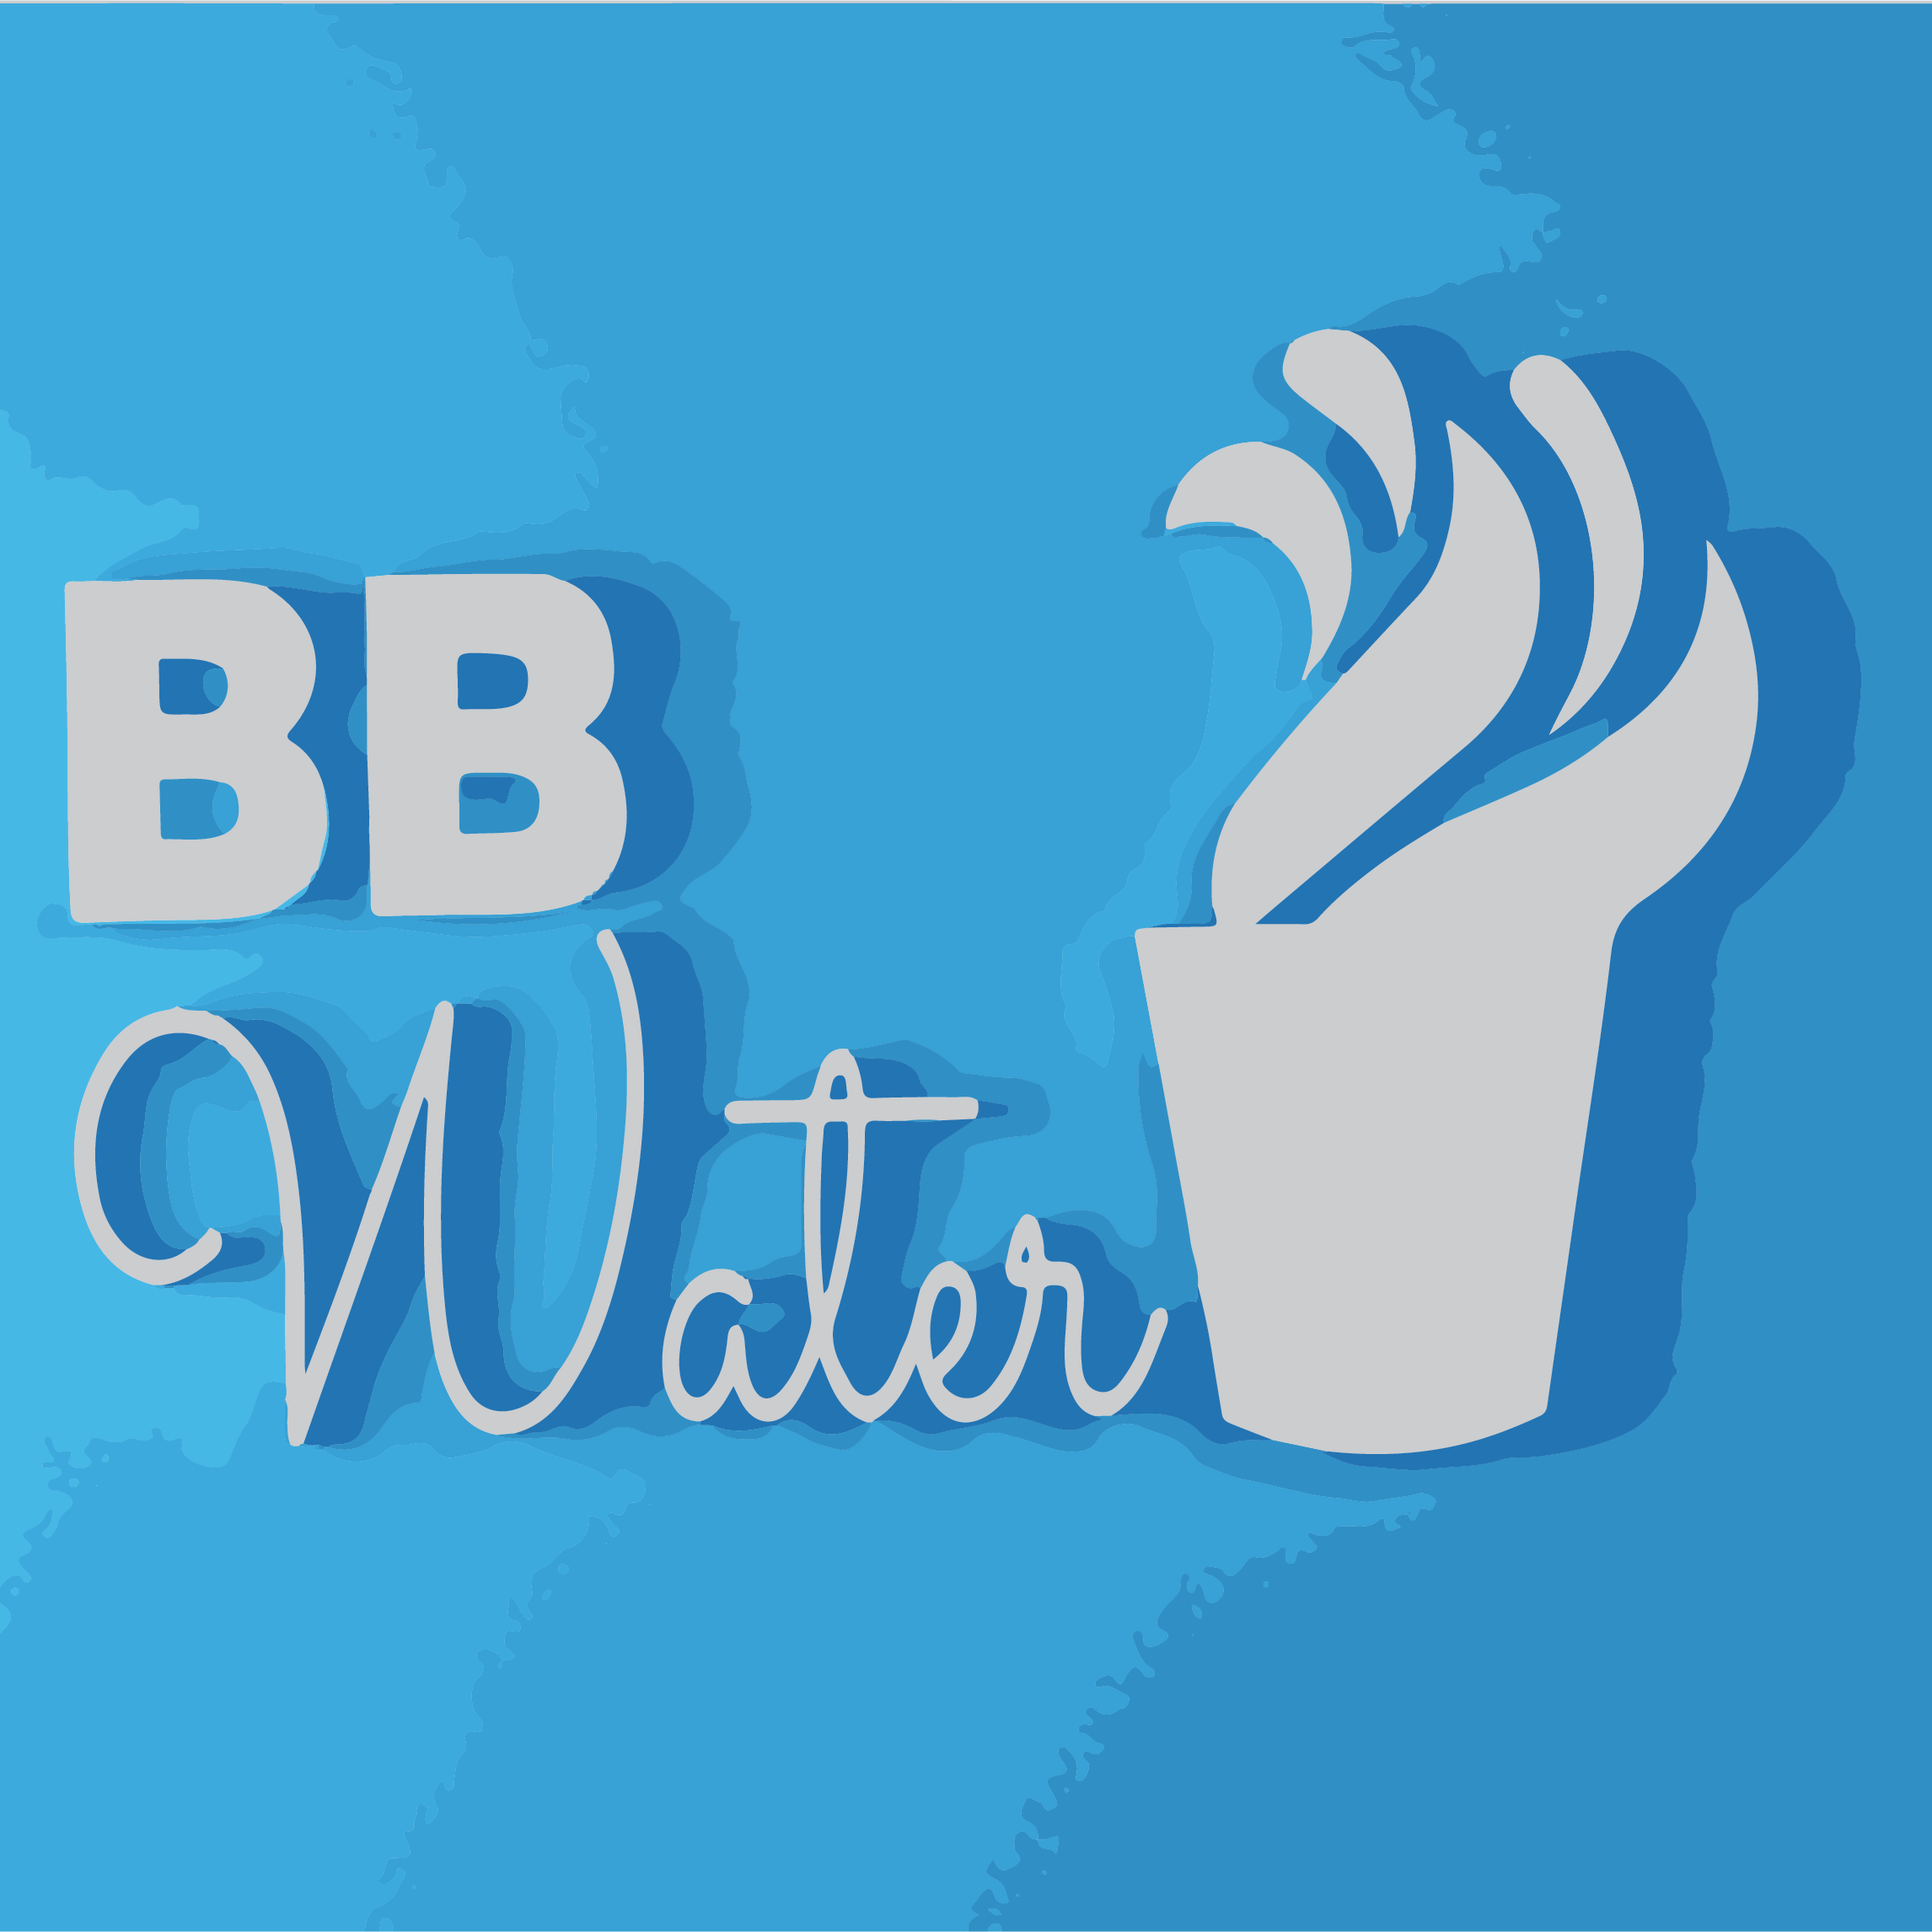 Logo for carbonated water preview image.